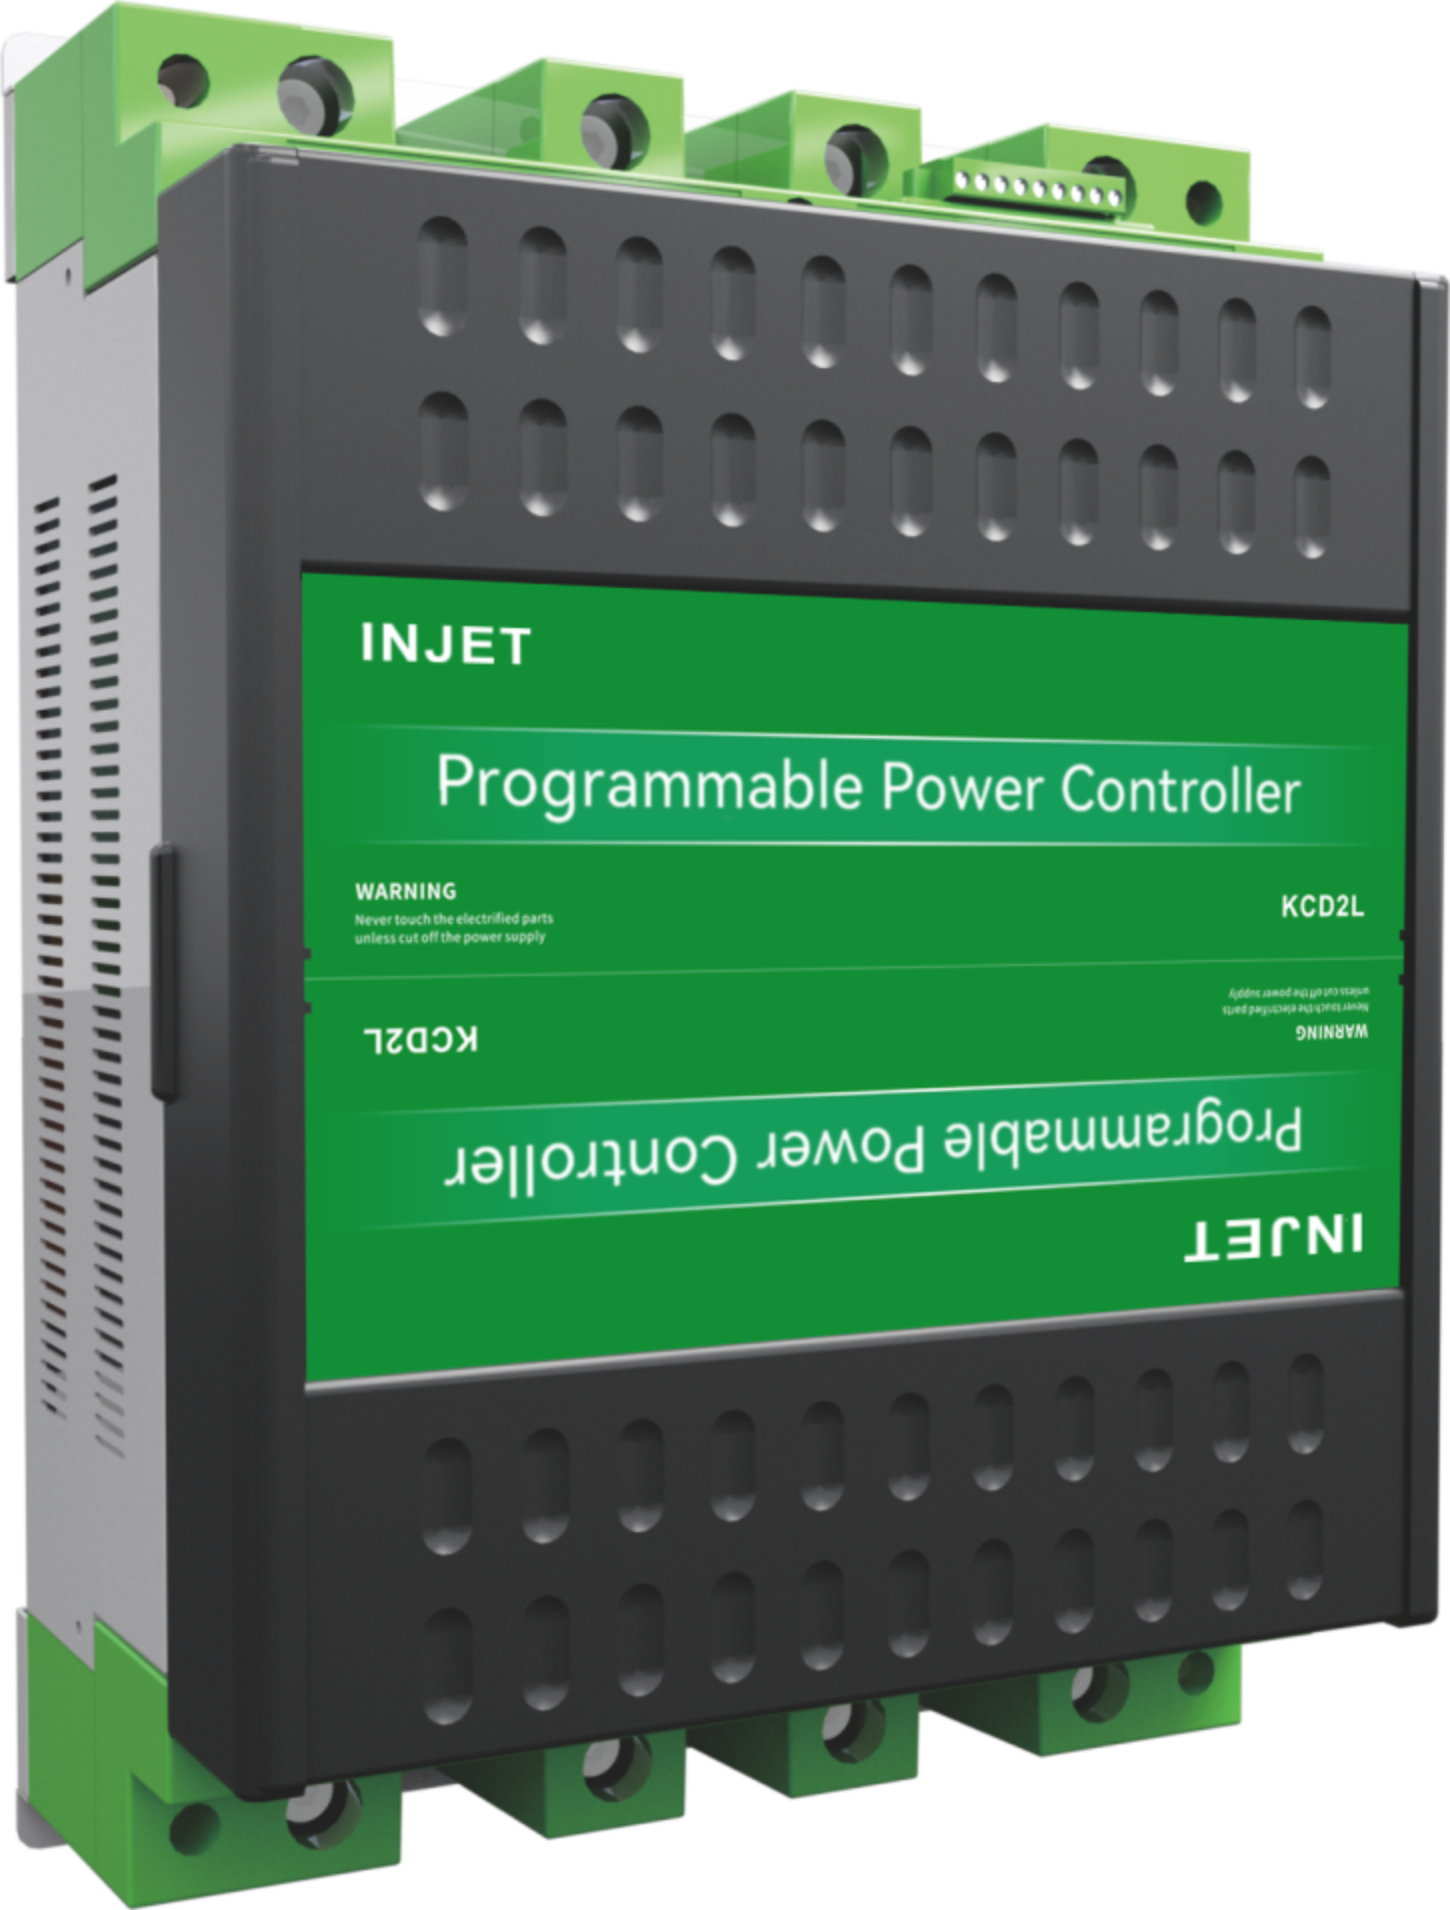 INJET-Programmable Power Controller(PPC)-V1.0.0(1)